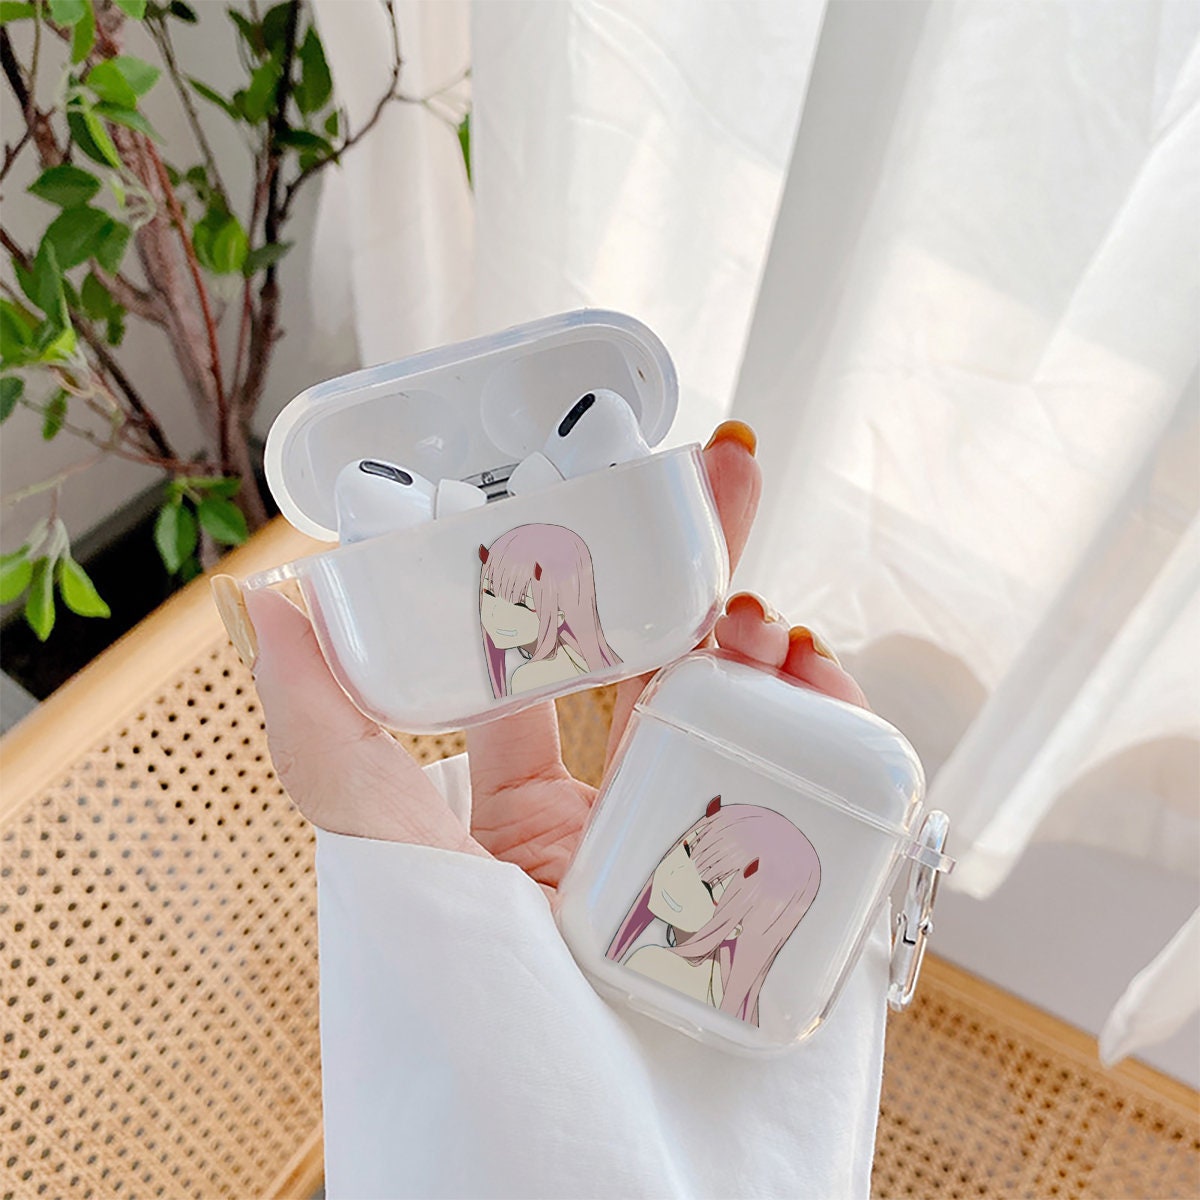 Buy Anime Girl Airpods Pro Case Airpods 2 Case Airpods Case Online in India   Etsy